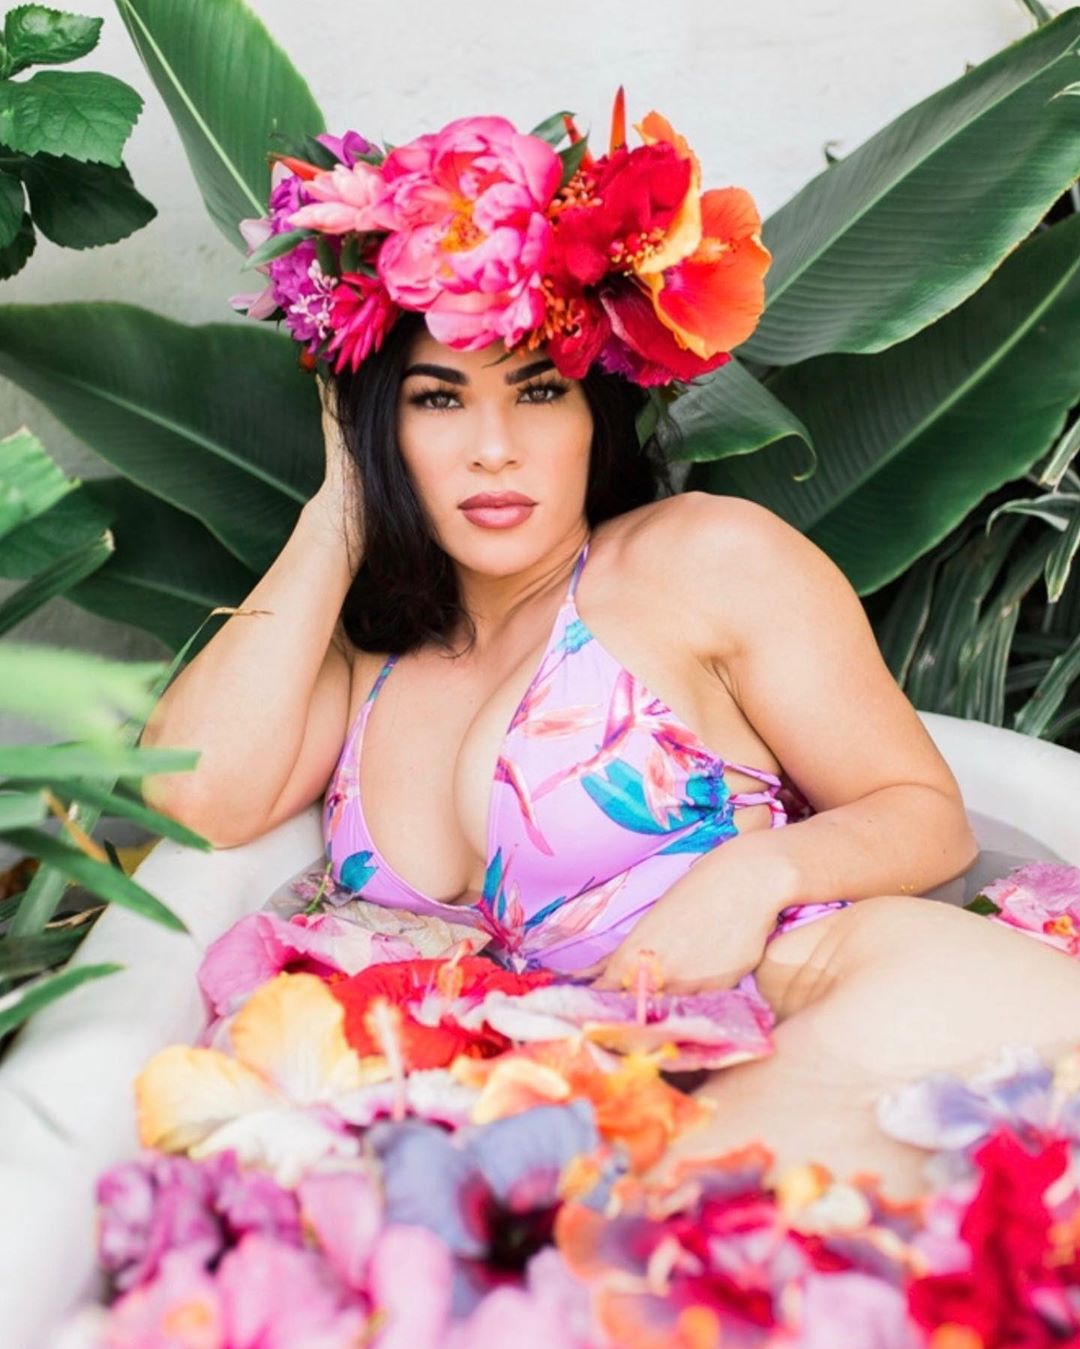 BKFC Fighter Rachael Ostovich Chilling Poolside! 